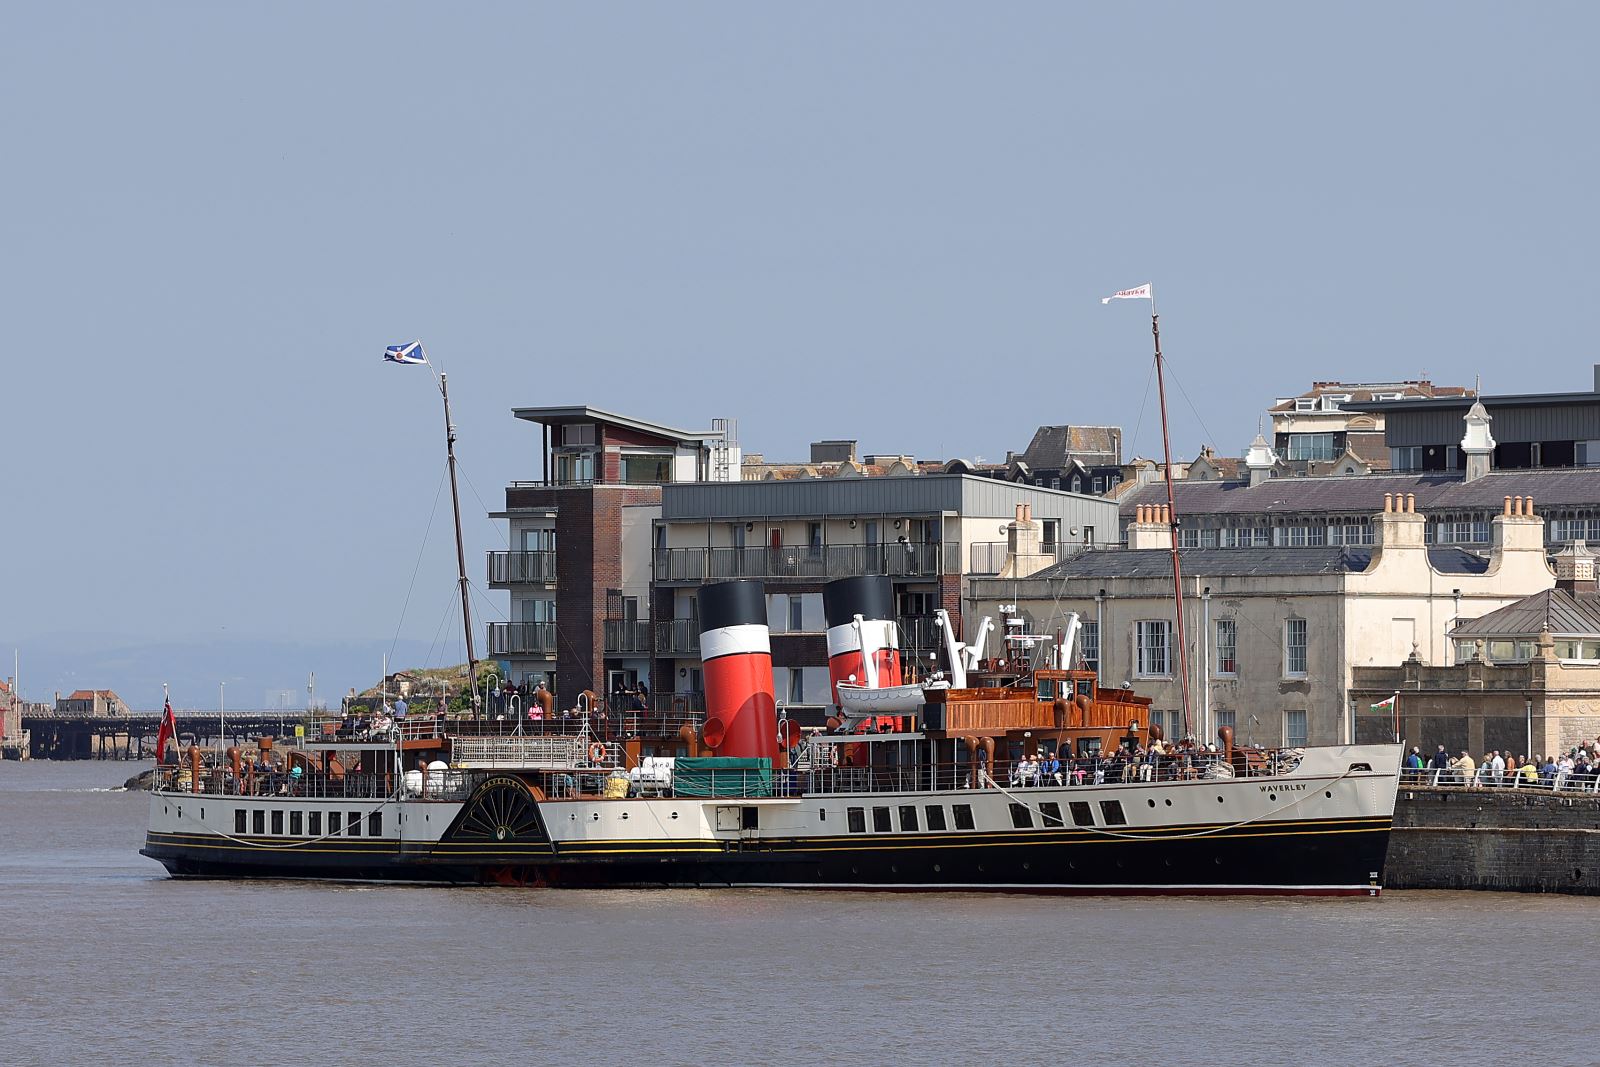 A large paddle steamer coming in to dock